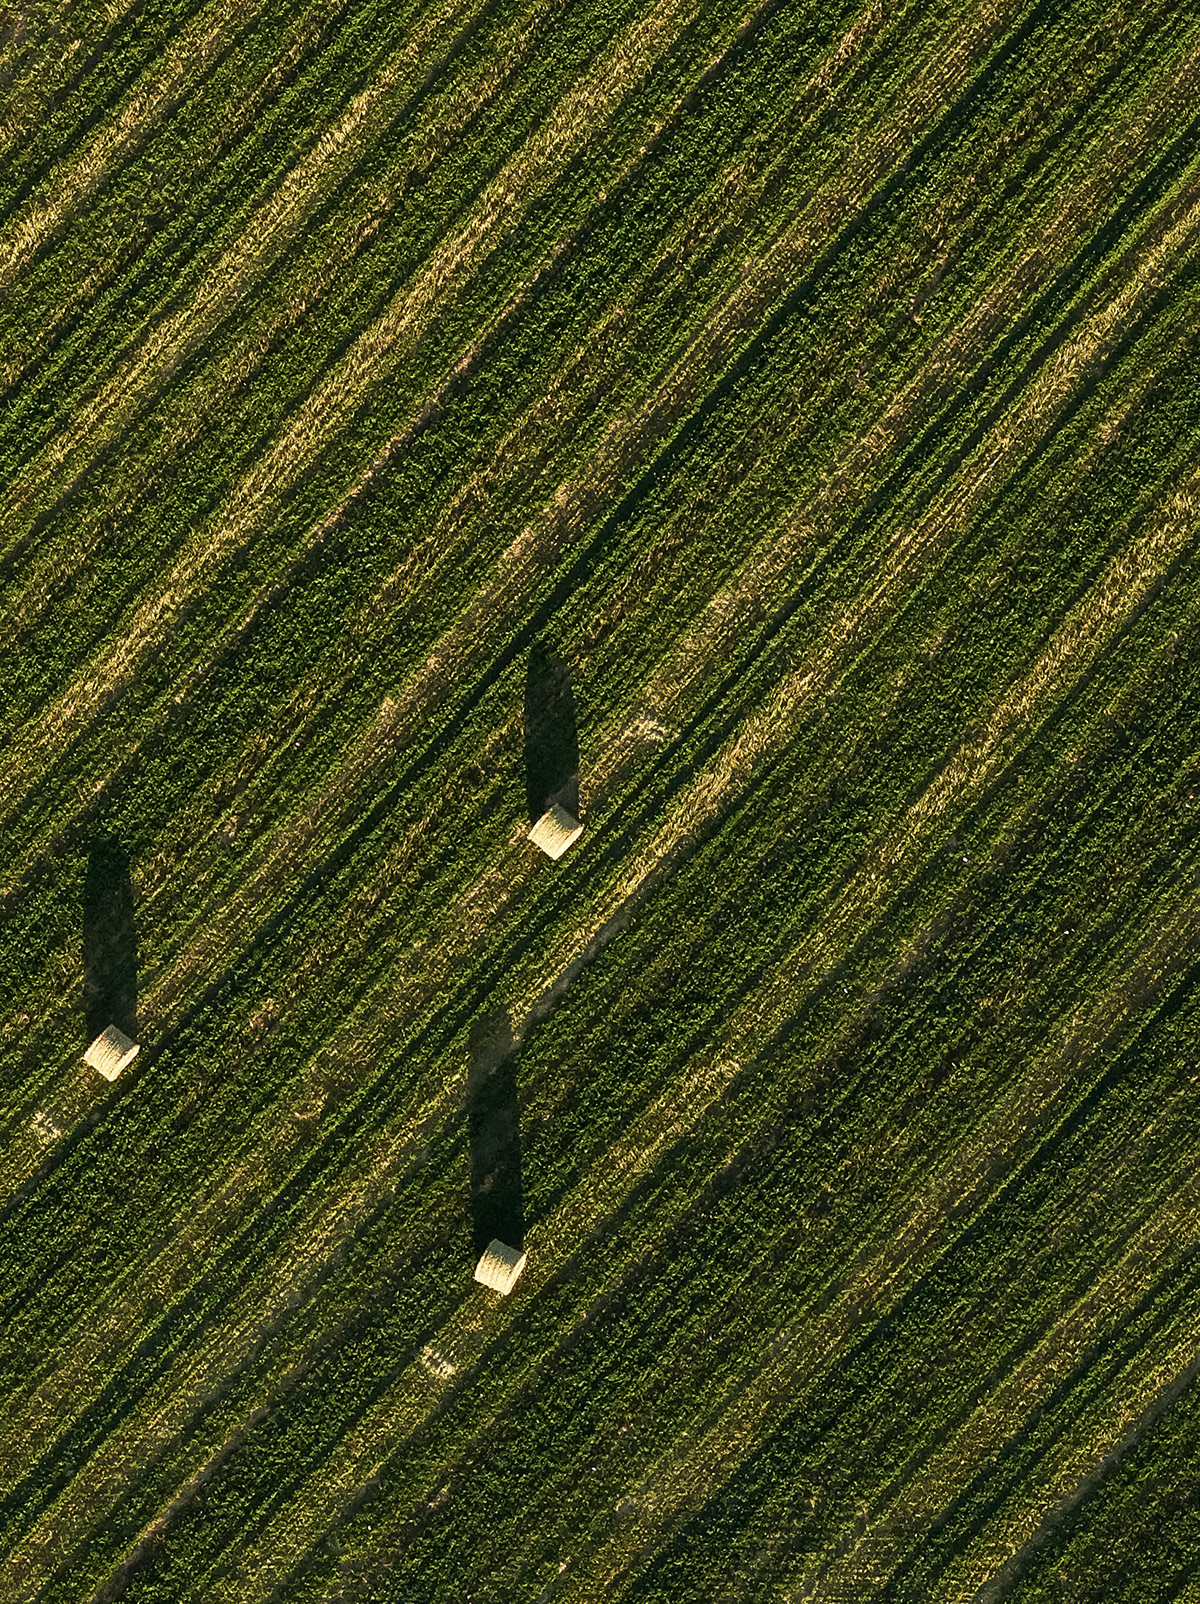 agriculture Washington Aerial Flying farmland Rolling Hills scenic Landscape abstract beauty